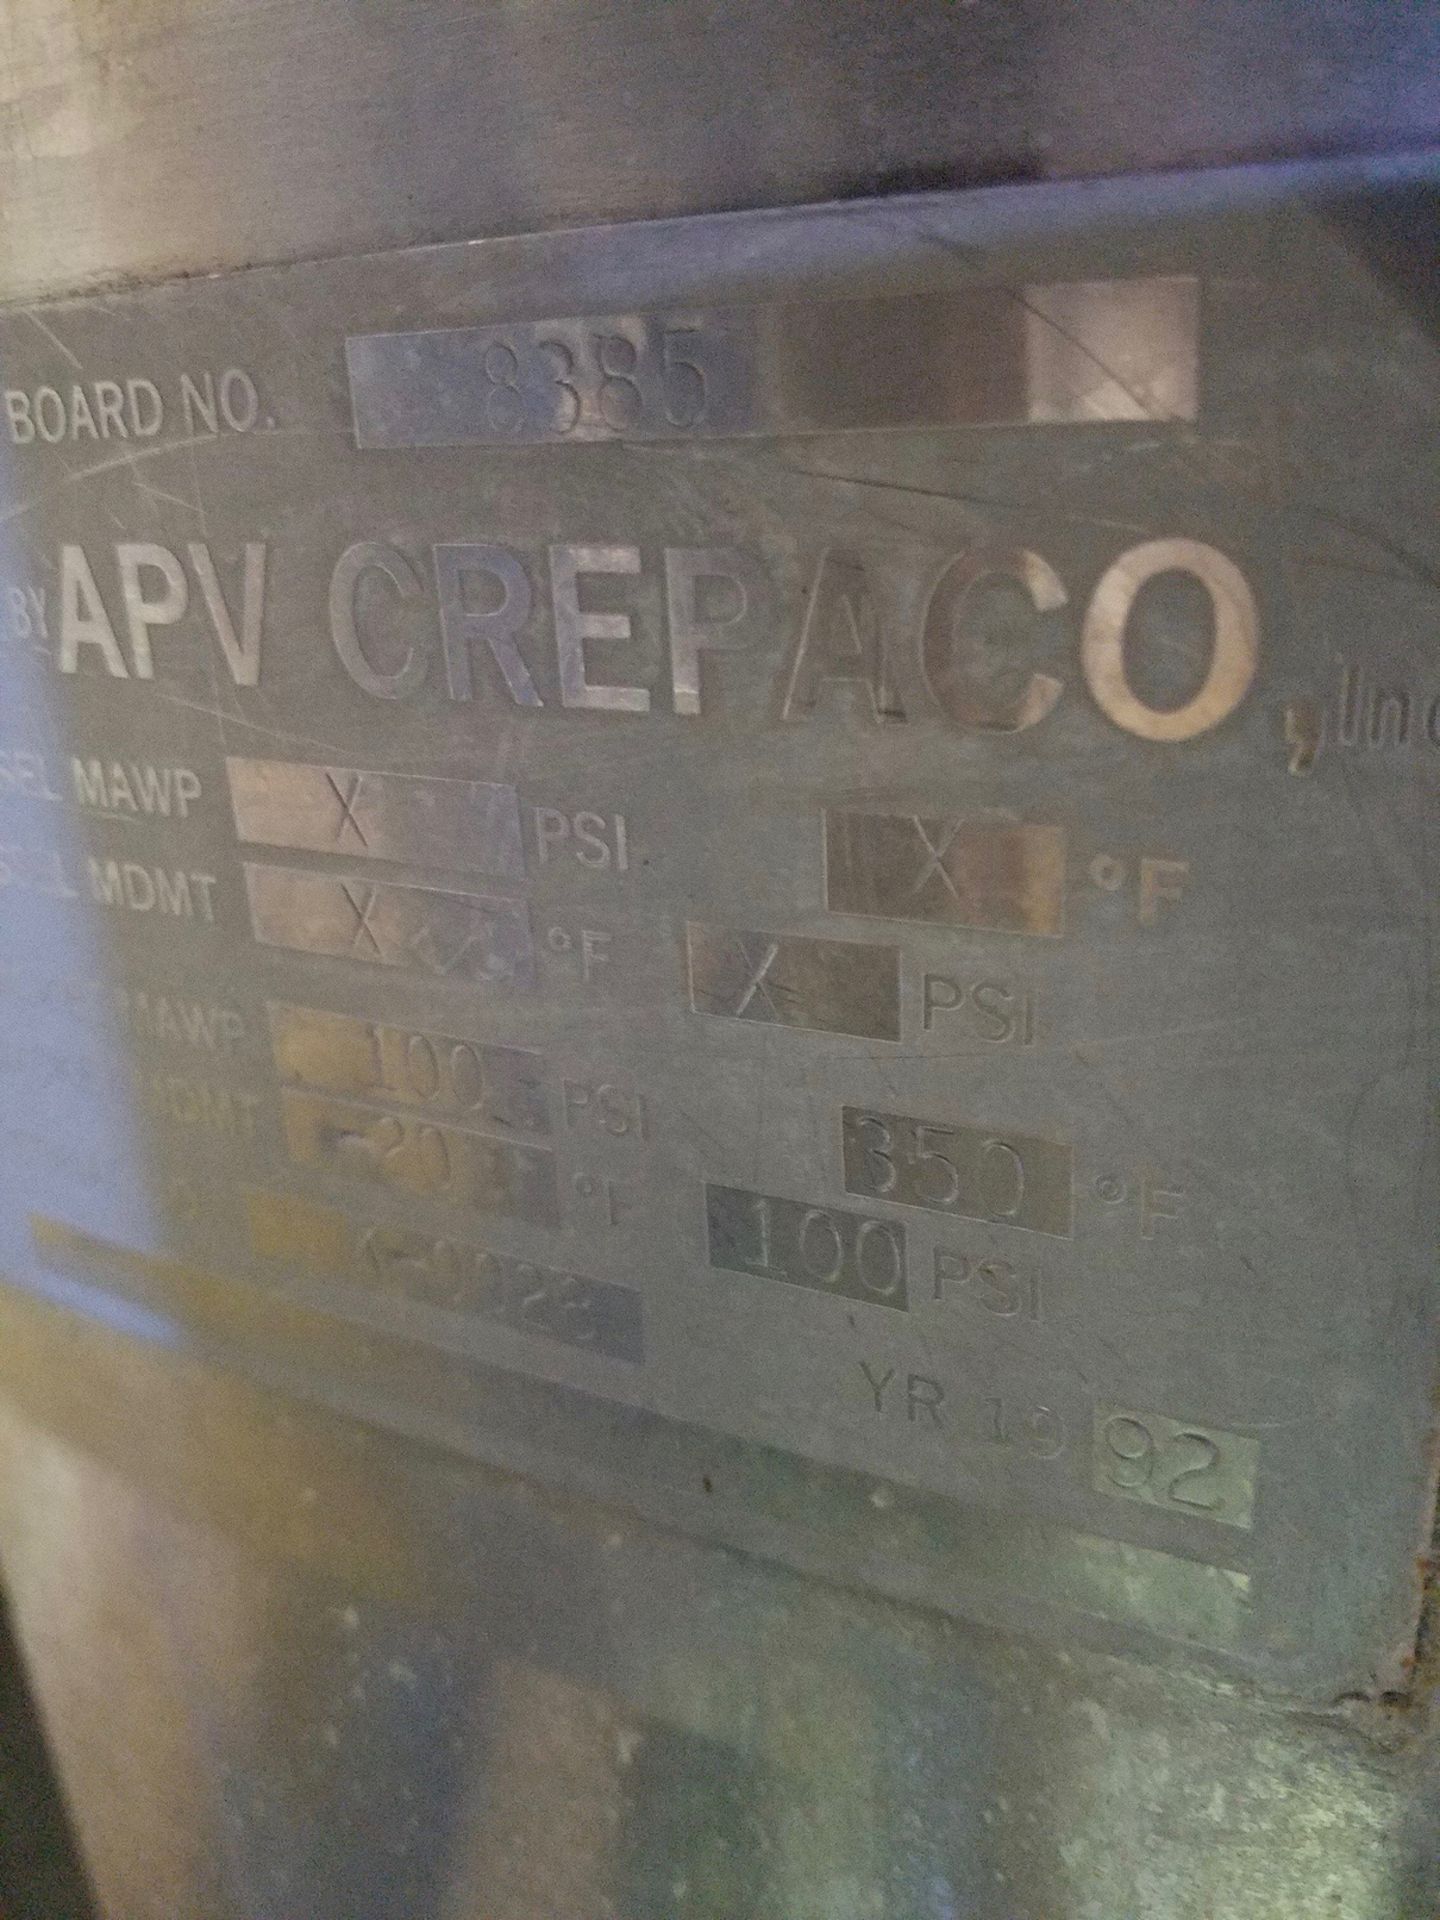 APV Crepaco Scrape Surface Double Motion Jacketed Mixing Tank, 50" x 33", Cone B | Rigging: $325 - Bild 4 aus 5